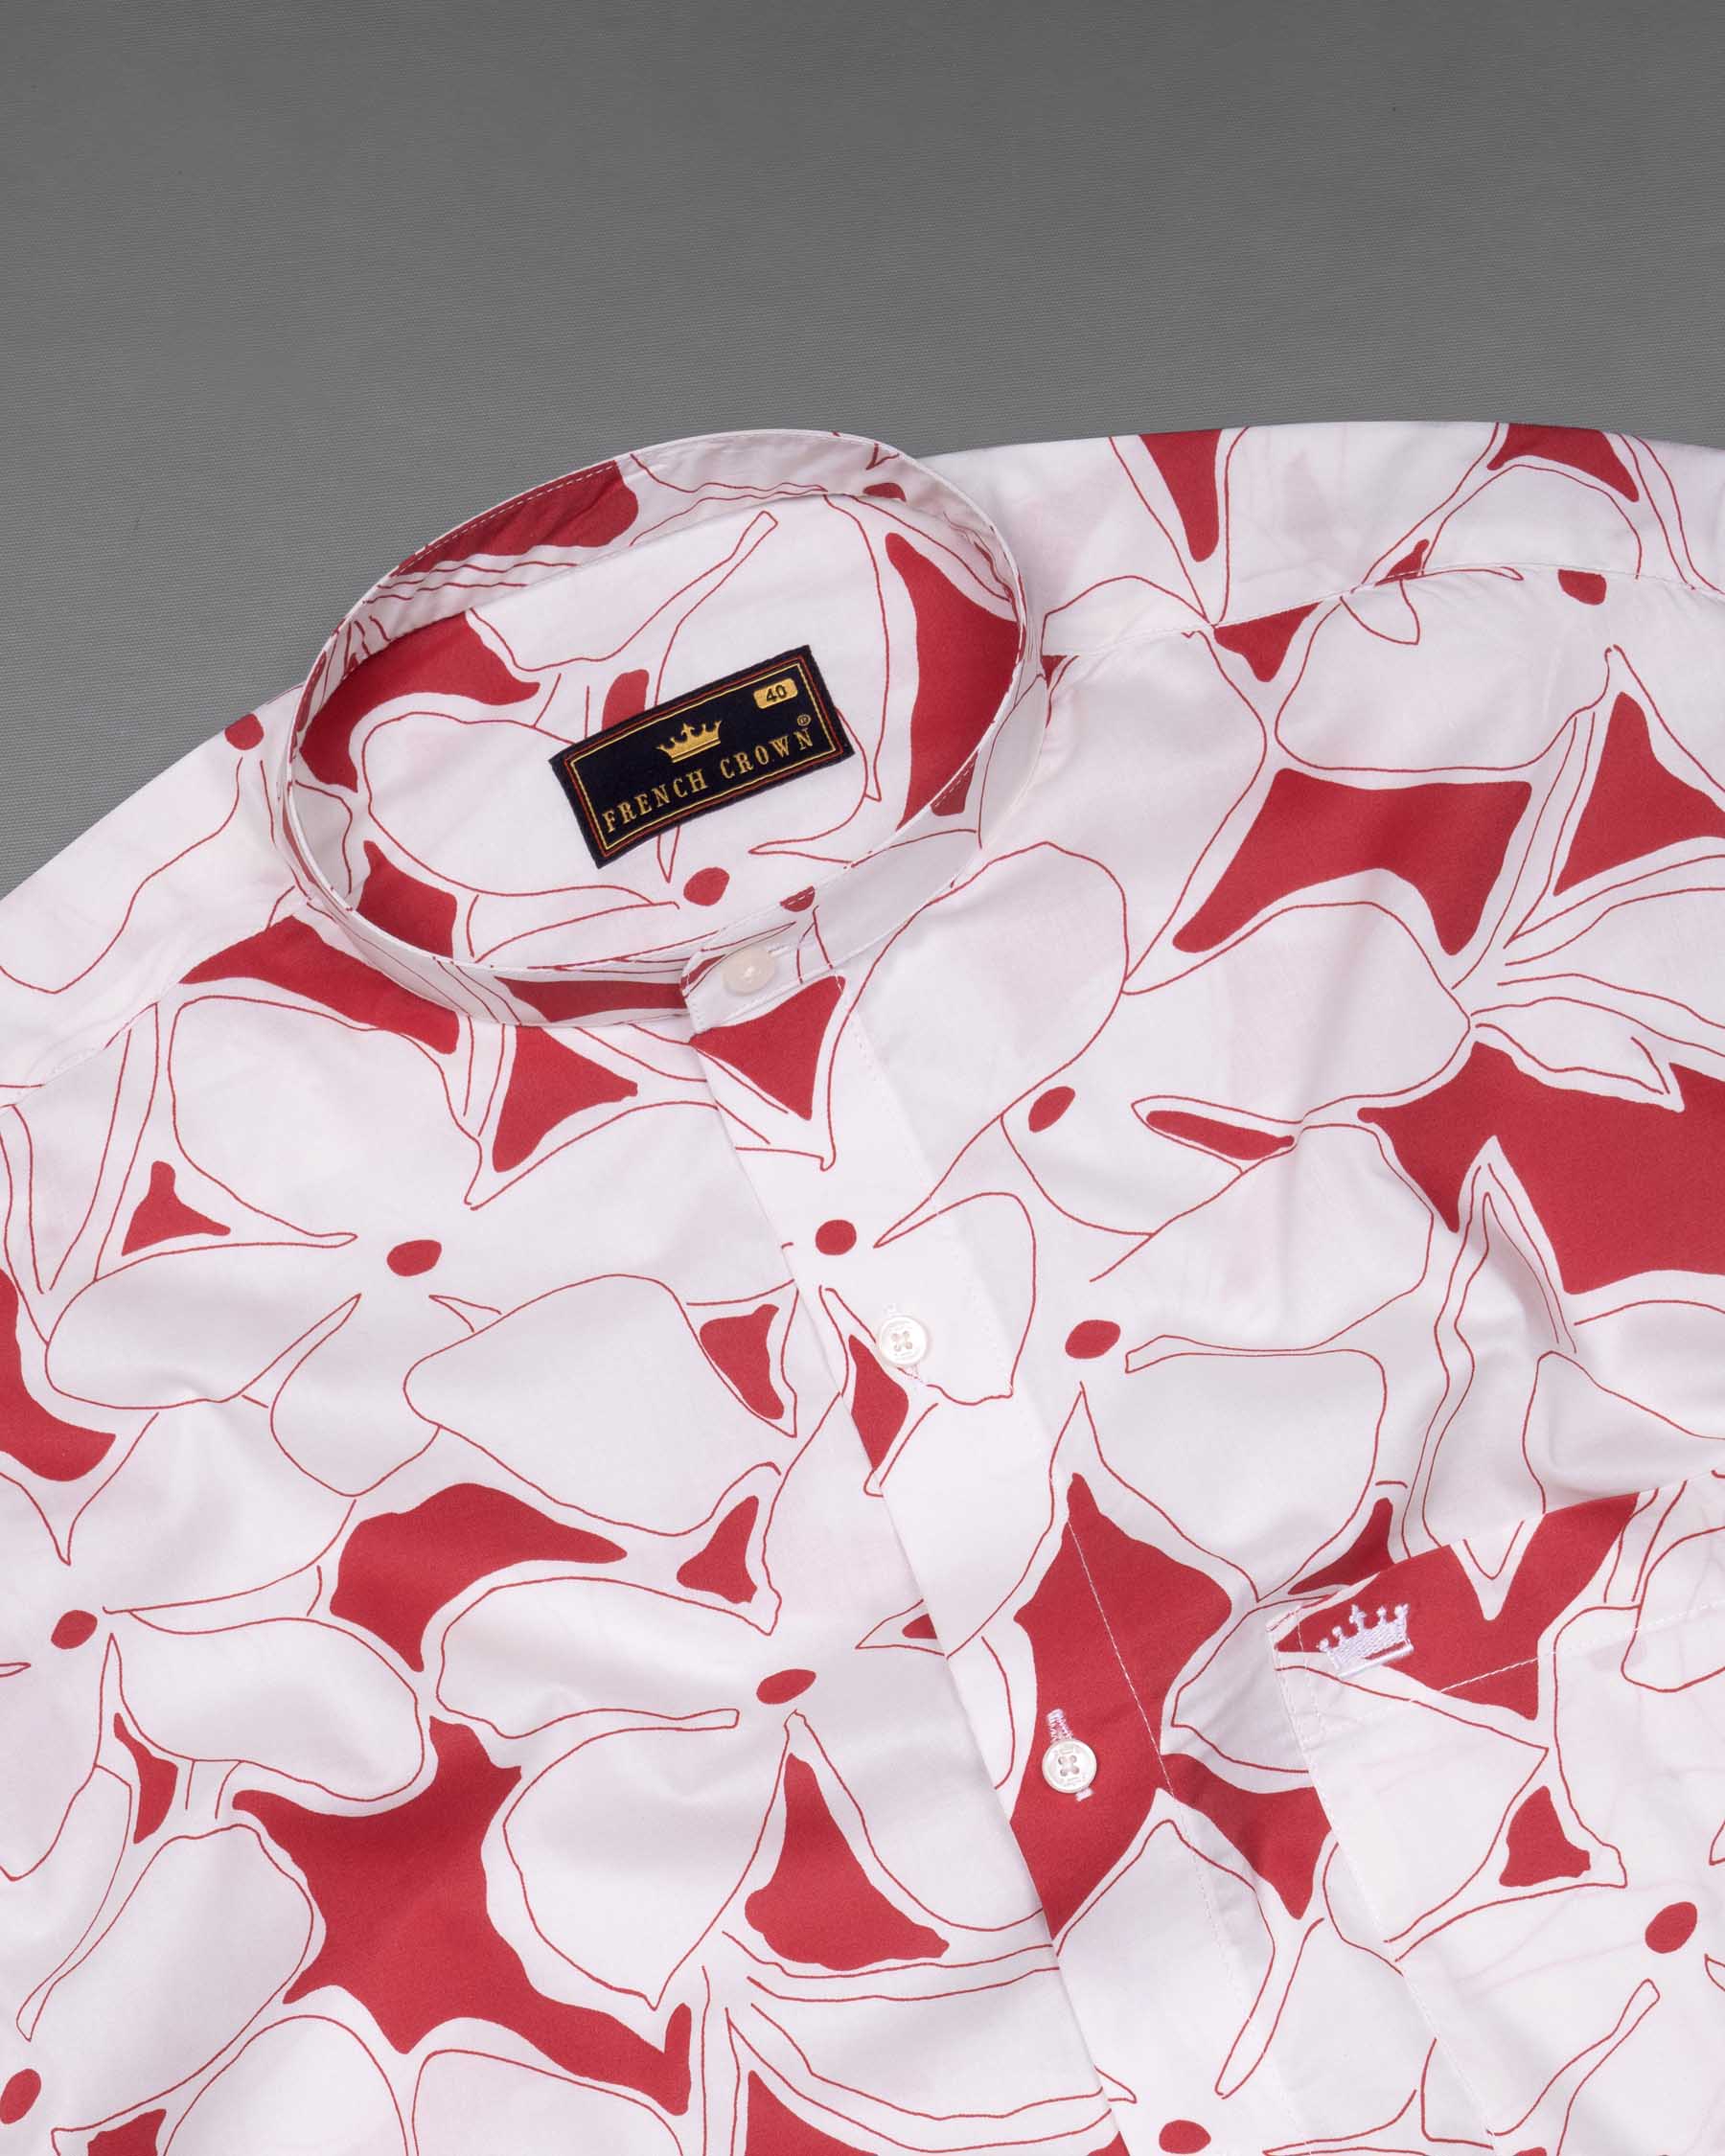 off White with red Quirky flowers Printed Premium Cotton Shirt 6060-M-38, 6060-M-H-38, 6060-M-39, 6060-M-H-39, 6060-M-40, 6060-M-H-40, 6060-M-42, 6060-M-H-42, 6060-M-44, 6060-M-H-44, 6060-M-46, 6060-M-H-46, 6060-M-48, 6060-M-H-48, 6060-M-50, 6060-M-H-50, 6060-M-52, 6060-M-H-52